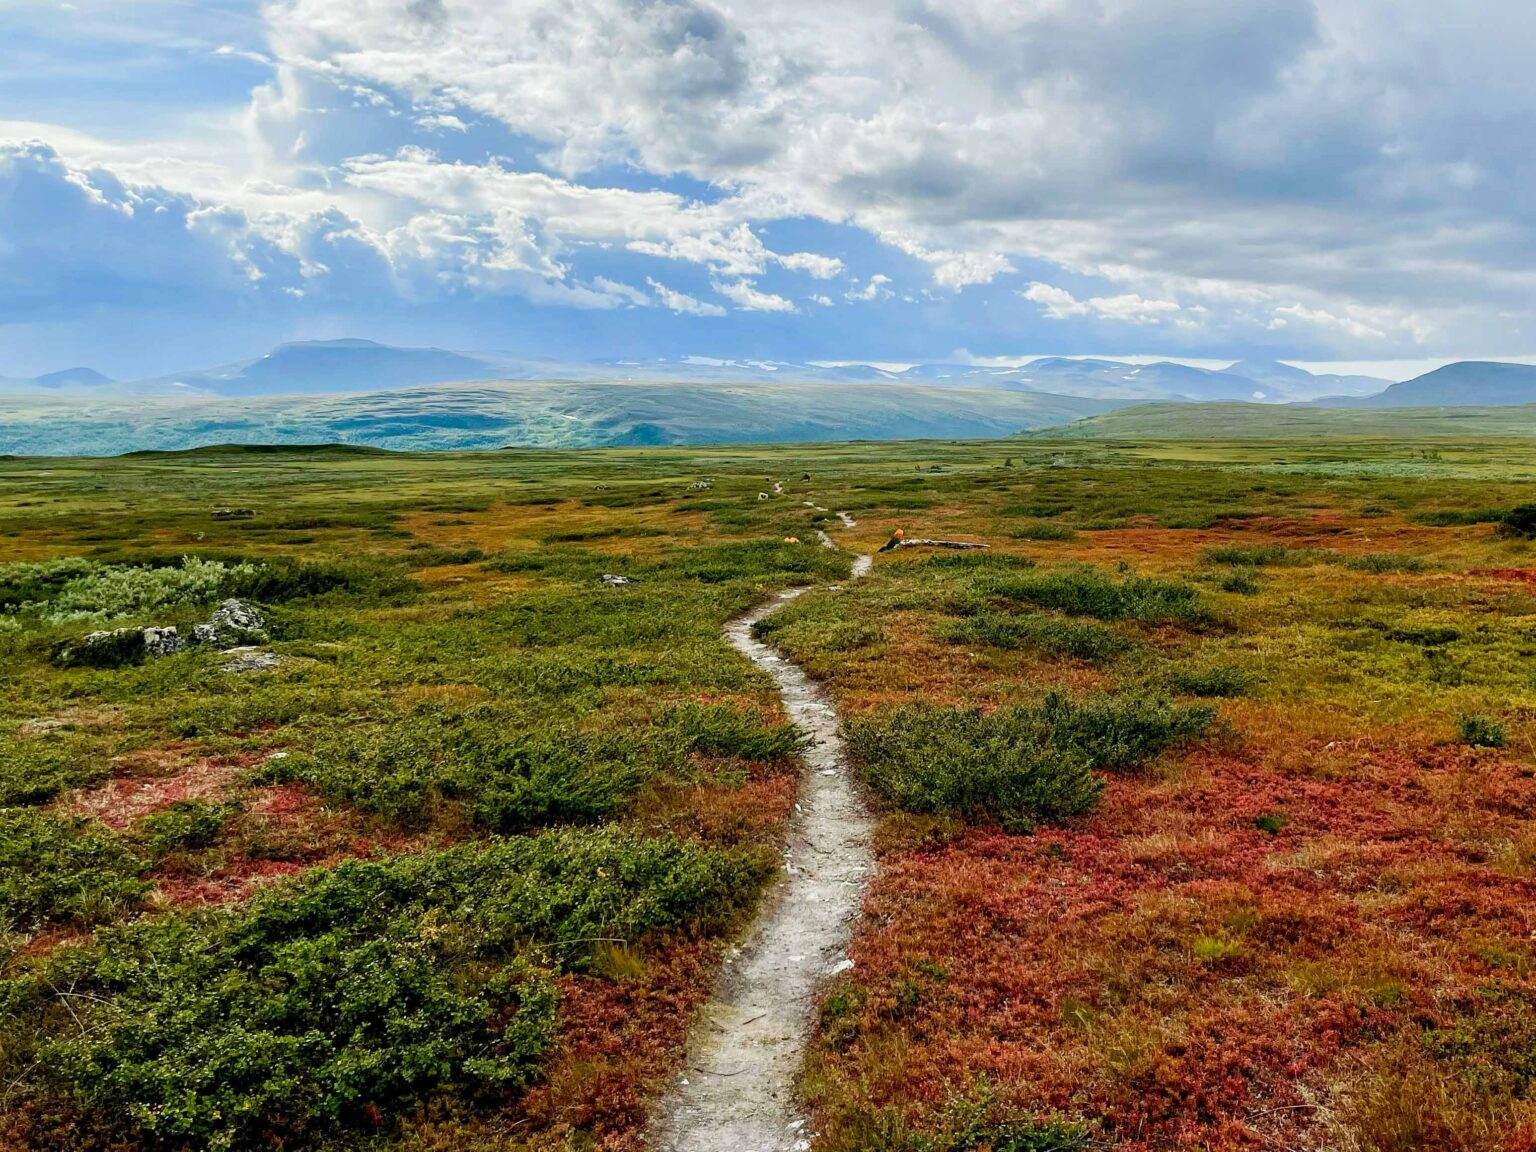 Kungsleden trail close to Ammarnäs (Photo by Anders Norén on Unsplash)